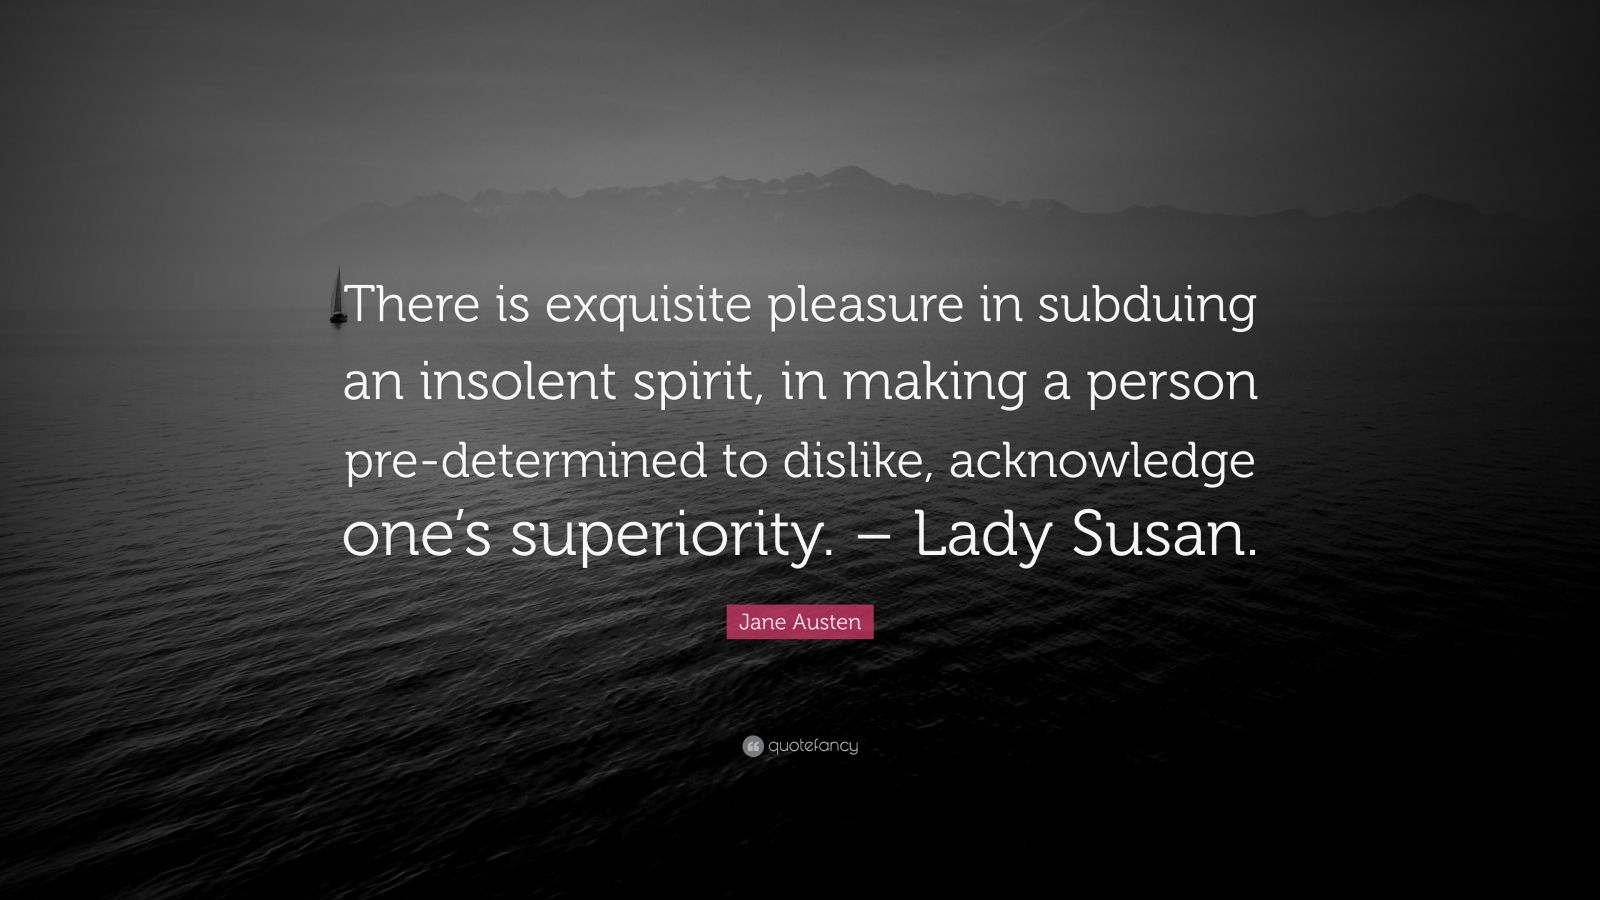 Jane Austen Quote: “There is exquisite pleasure in subduing an insolent ...